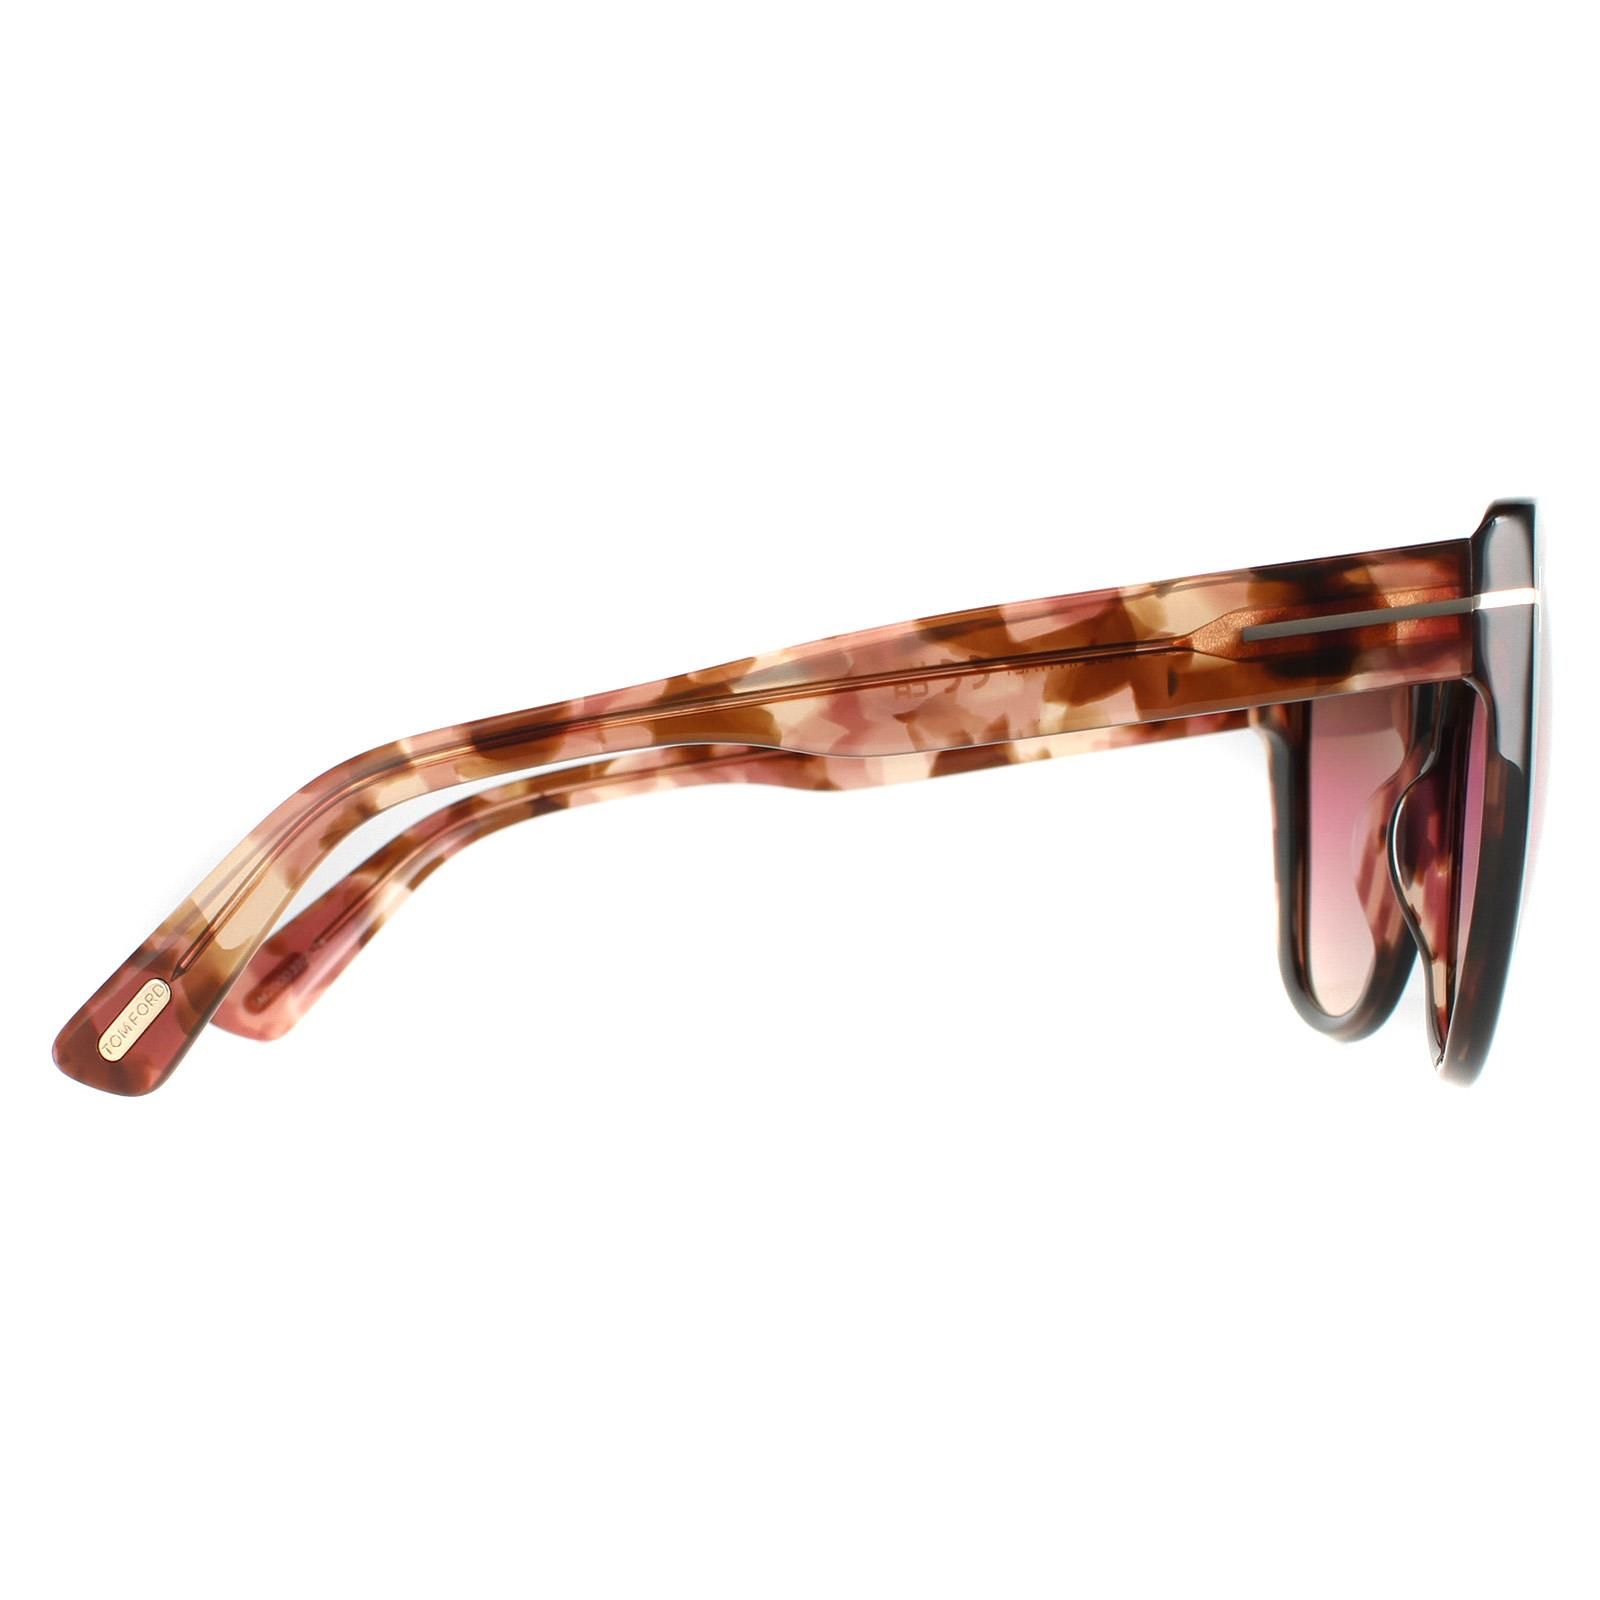 Tom Ford Cat Eye Womens Black and Havana Brown Pink Gradient FT0937 Nora Sunglasses are a gorgeous cat eye design crafted from chunky acetate and embellished with the Tom Ford T logo on the temples.